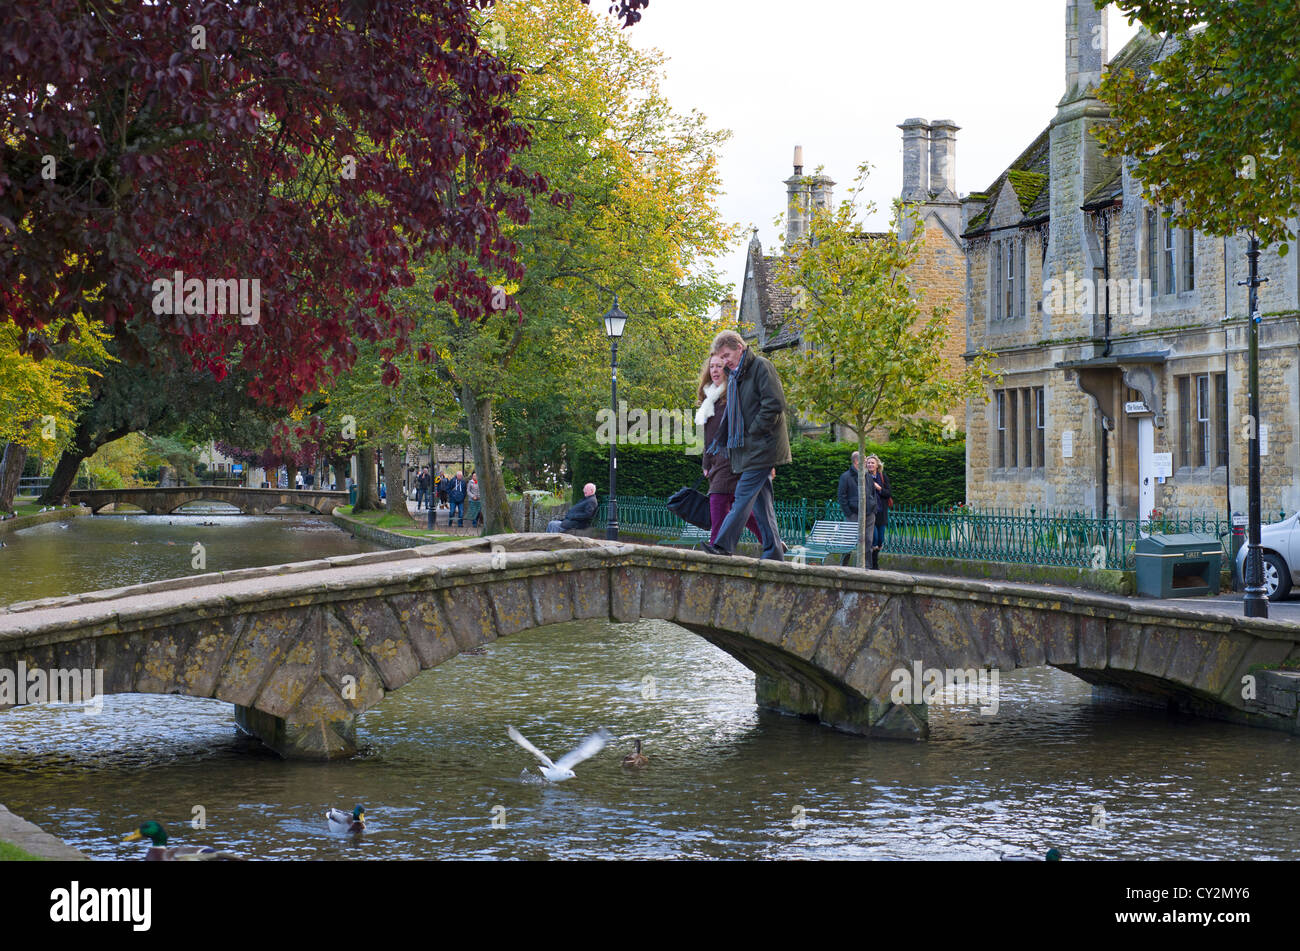 Cotswold village of Bourton-on-the-water with tourists crossing the bridge over the river Windrush, Gloucestershire, England Stock Photo